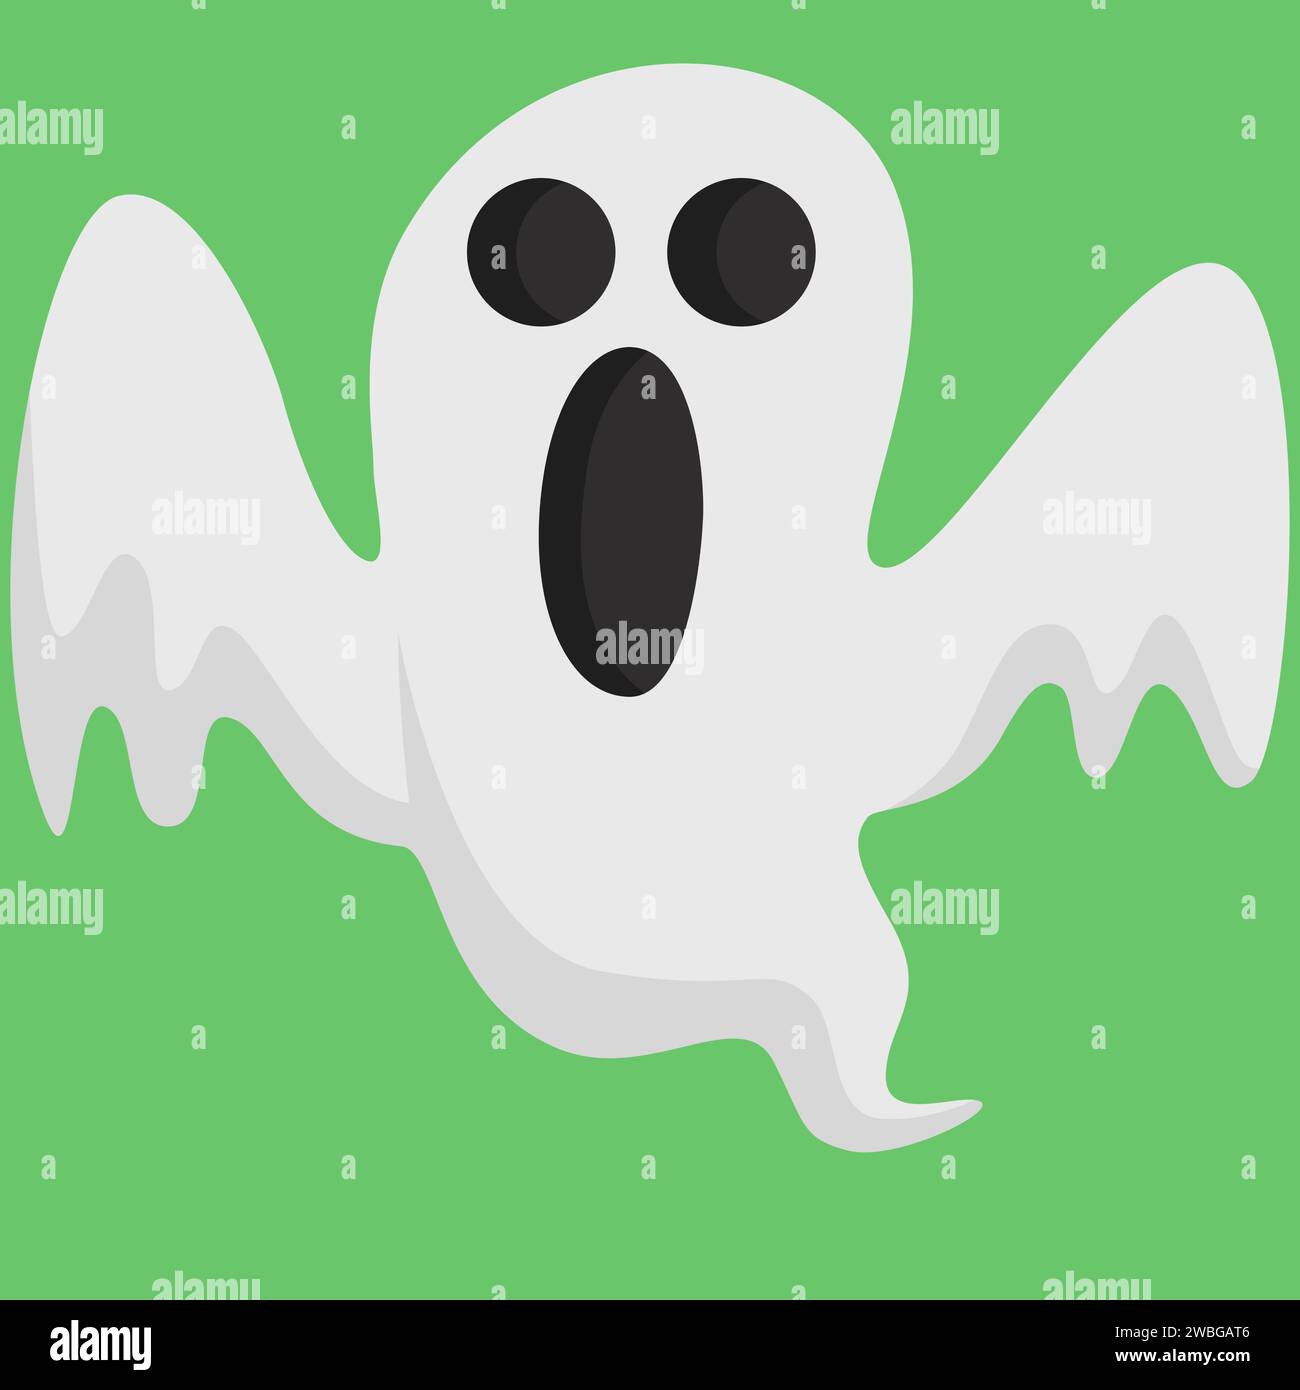 Happy Halloween day element background vector. Cute collection of spooky ghost, pumpkin, bat, candy, cat, skull, spider, grave, castle. Adorable hallo Stock Photo